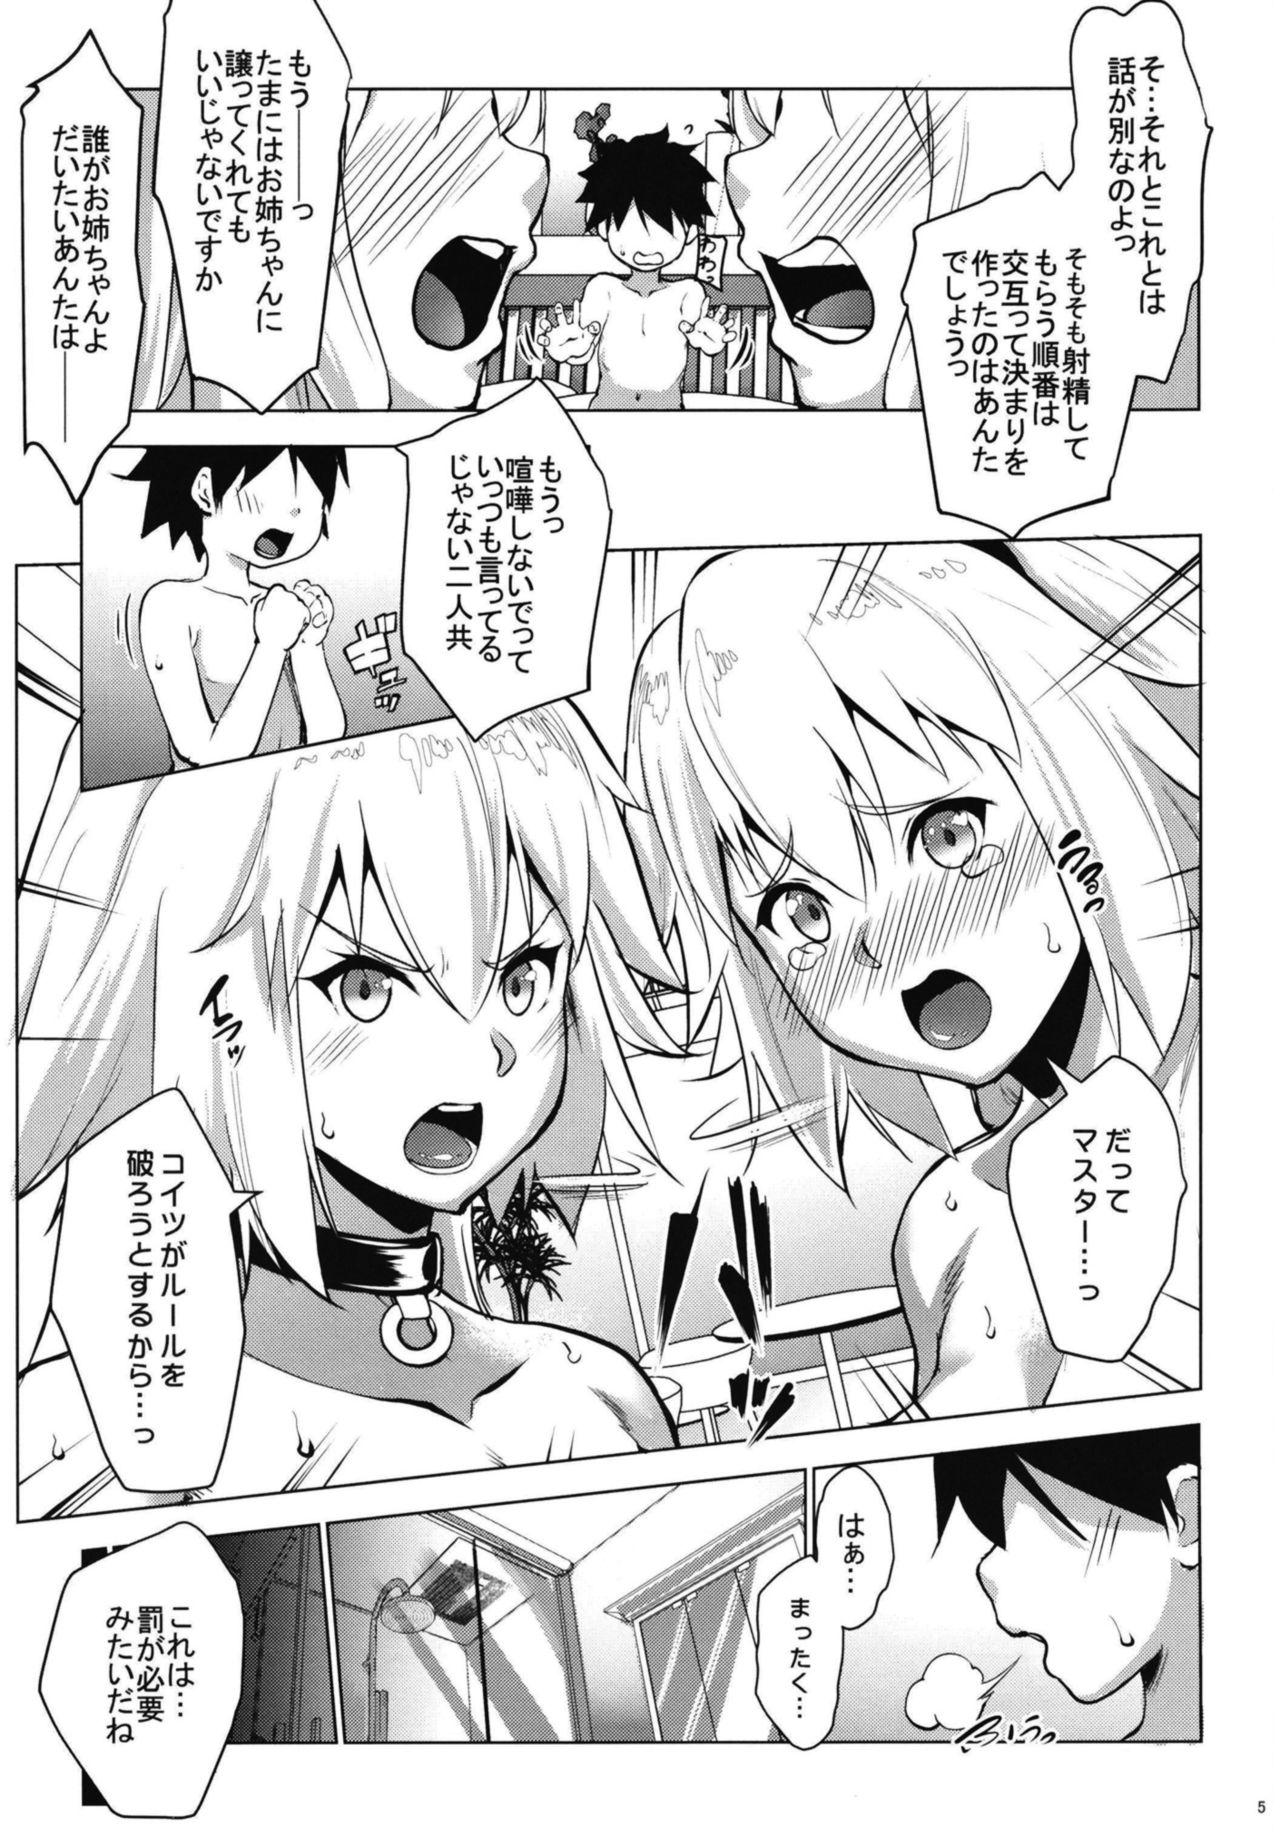 First Time Obedient Servant Jeanne x Jeanne - Fate grand order Clothed - Page 5